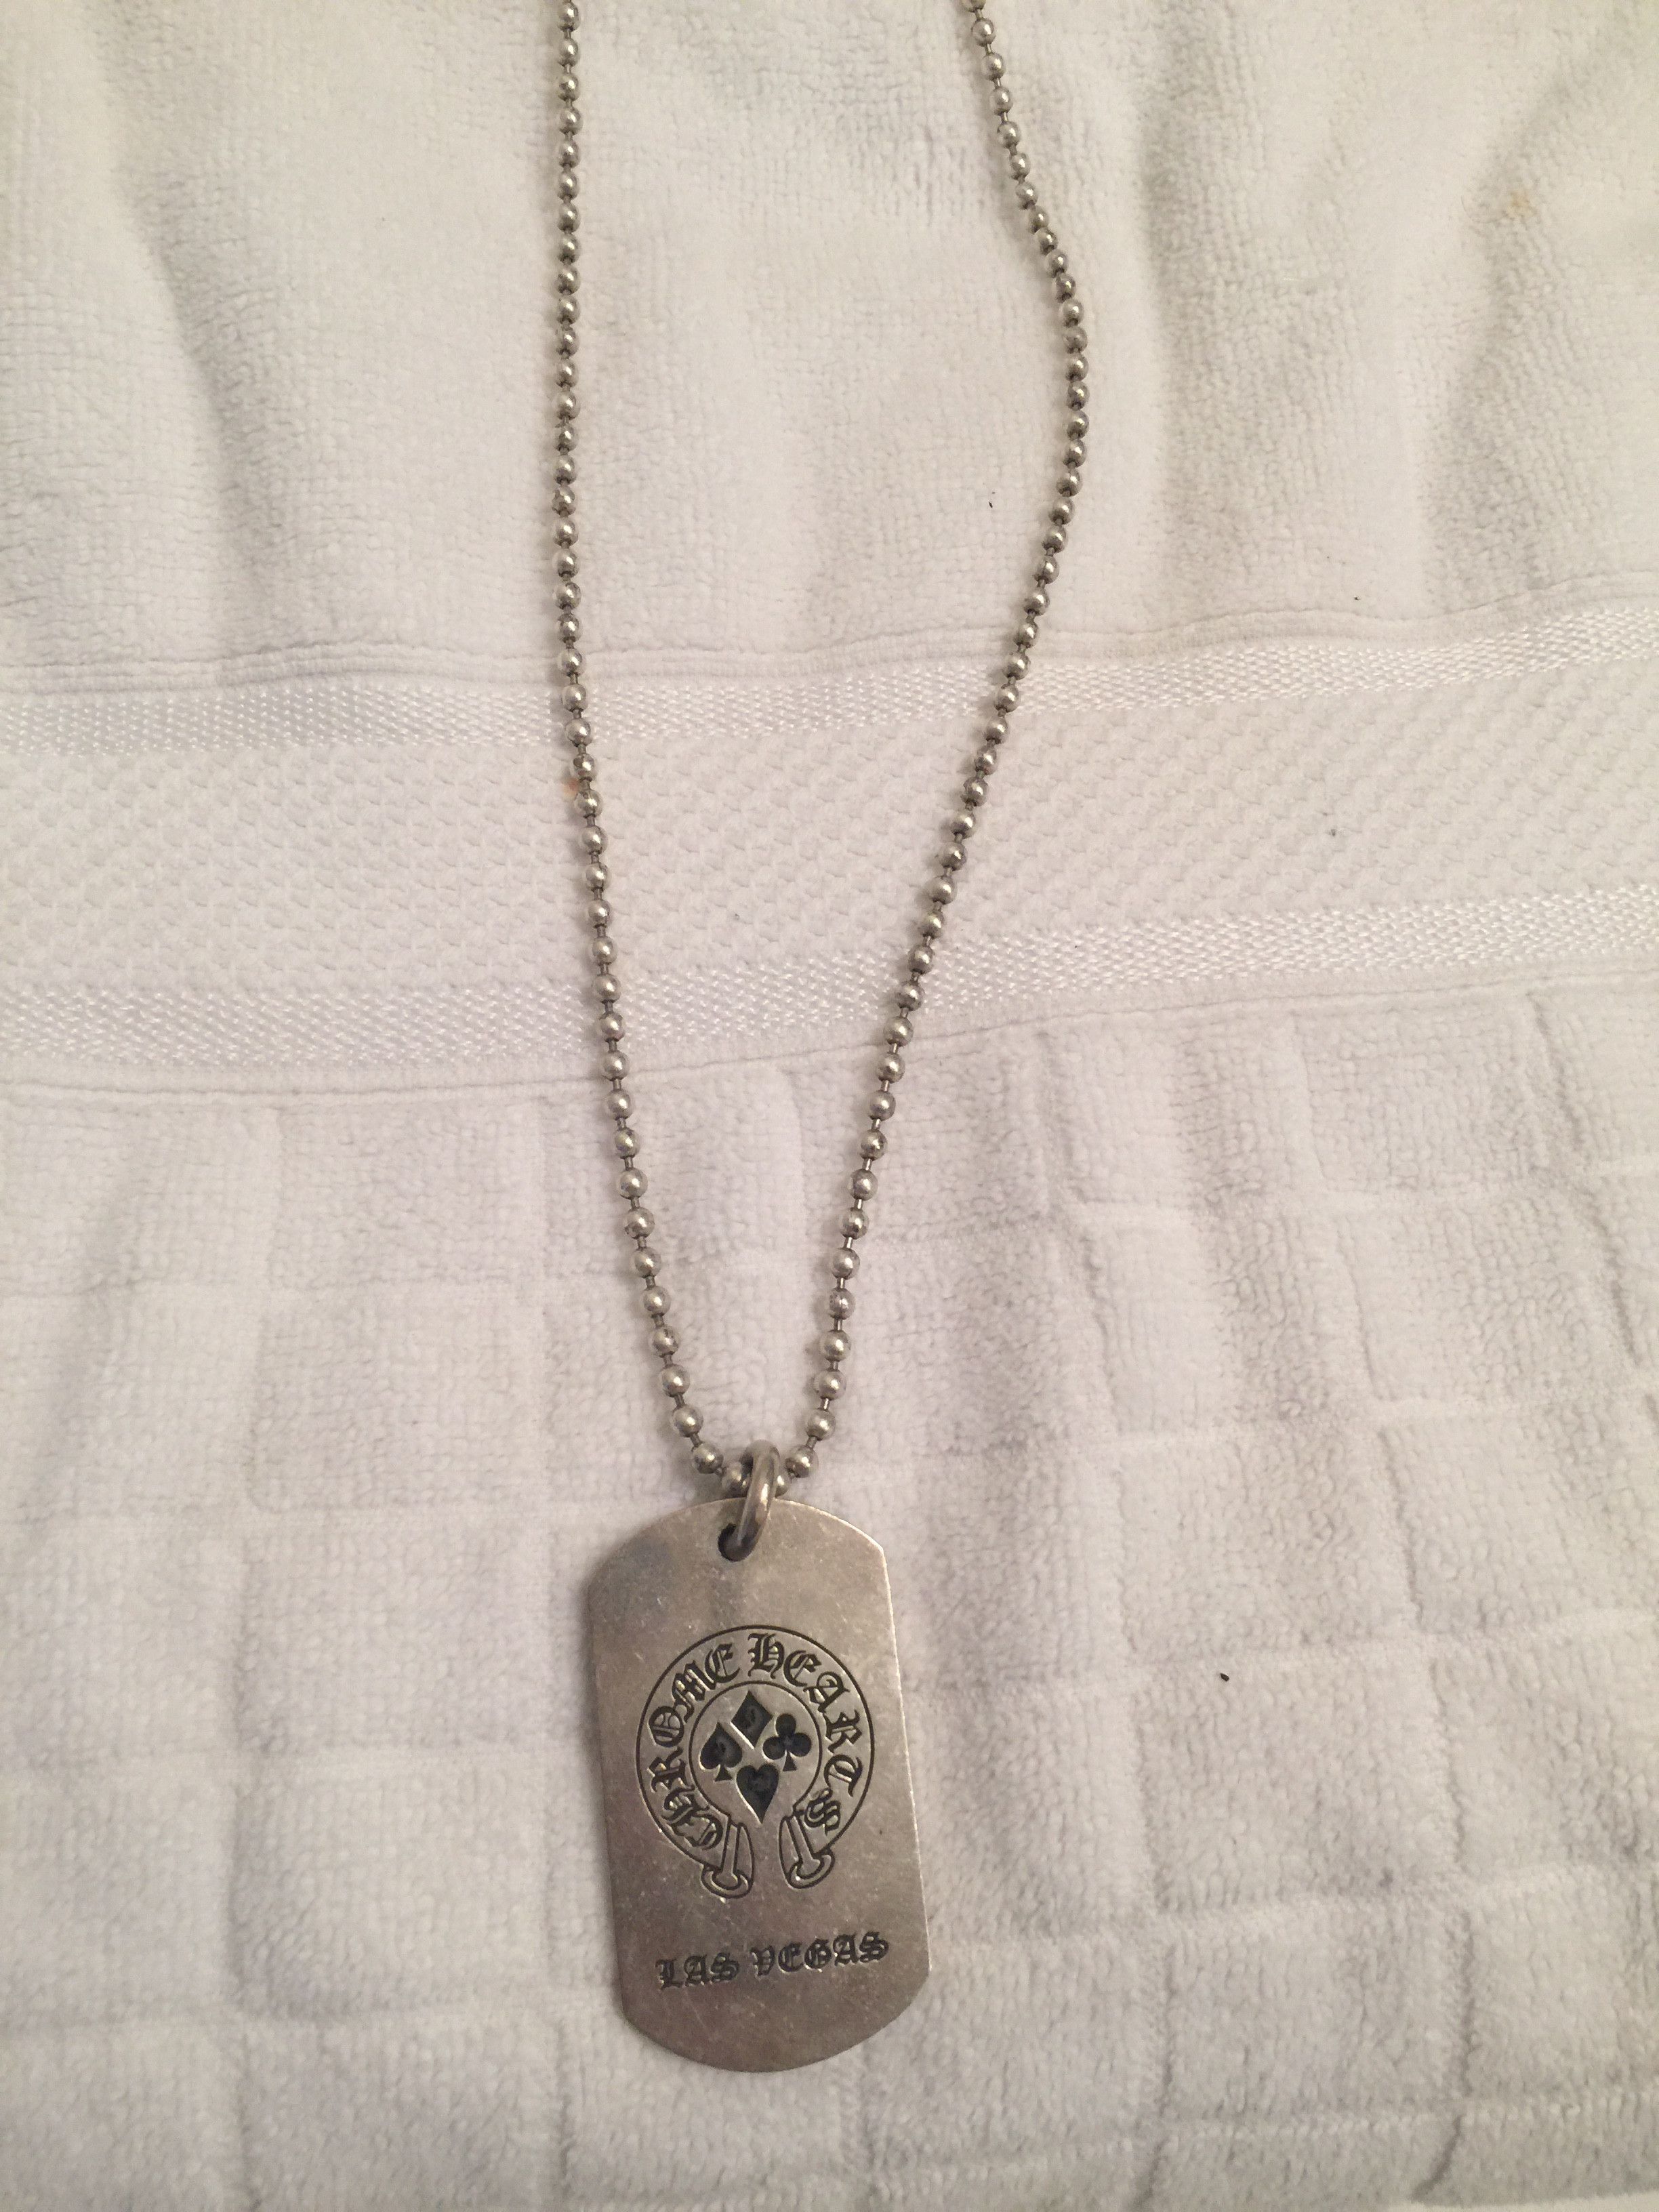 Authentic Chrome Hearts Sterling Dog Tag Necklace with Ball Chain